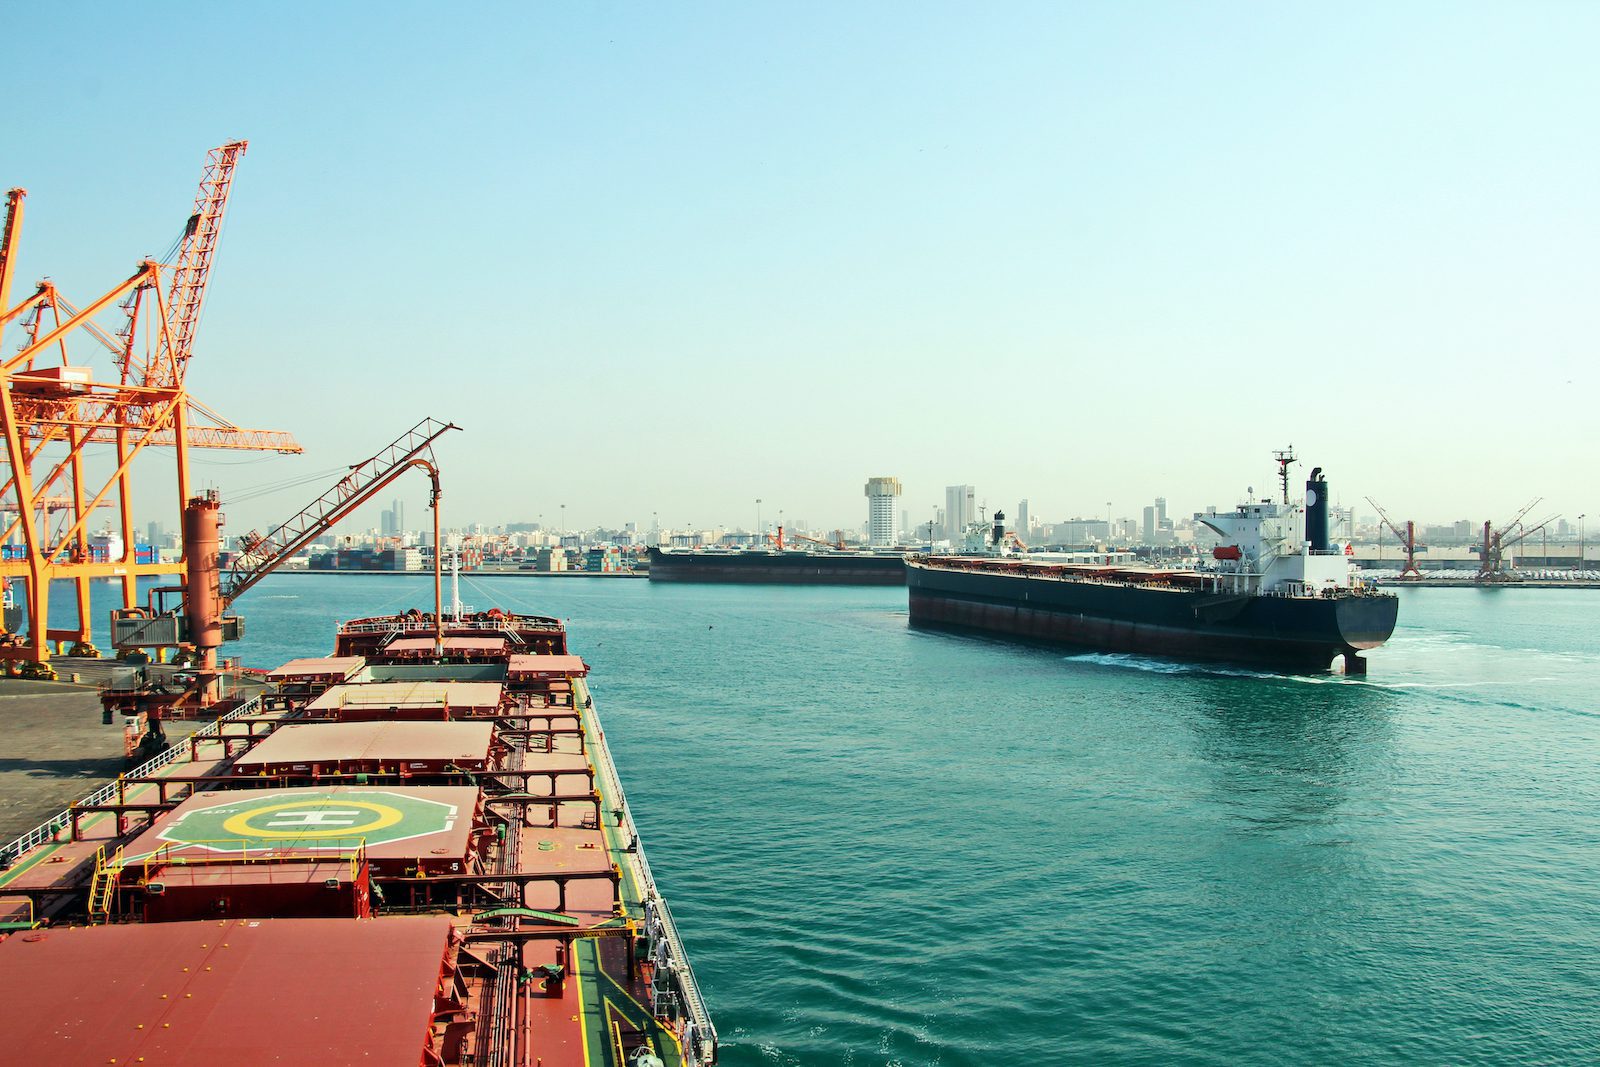 Baltic Dry Index Scales 13-Year Peak on Strong Rates Across Segments